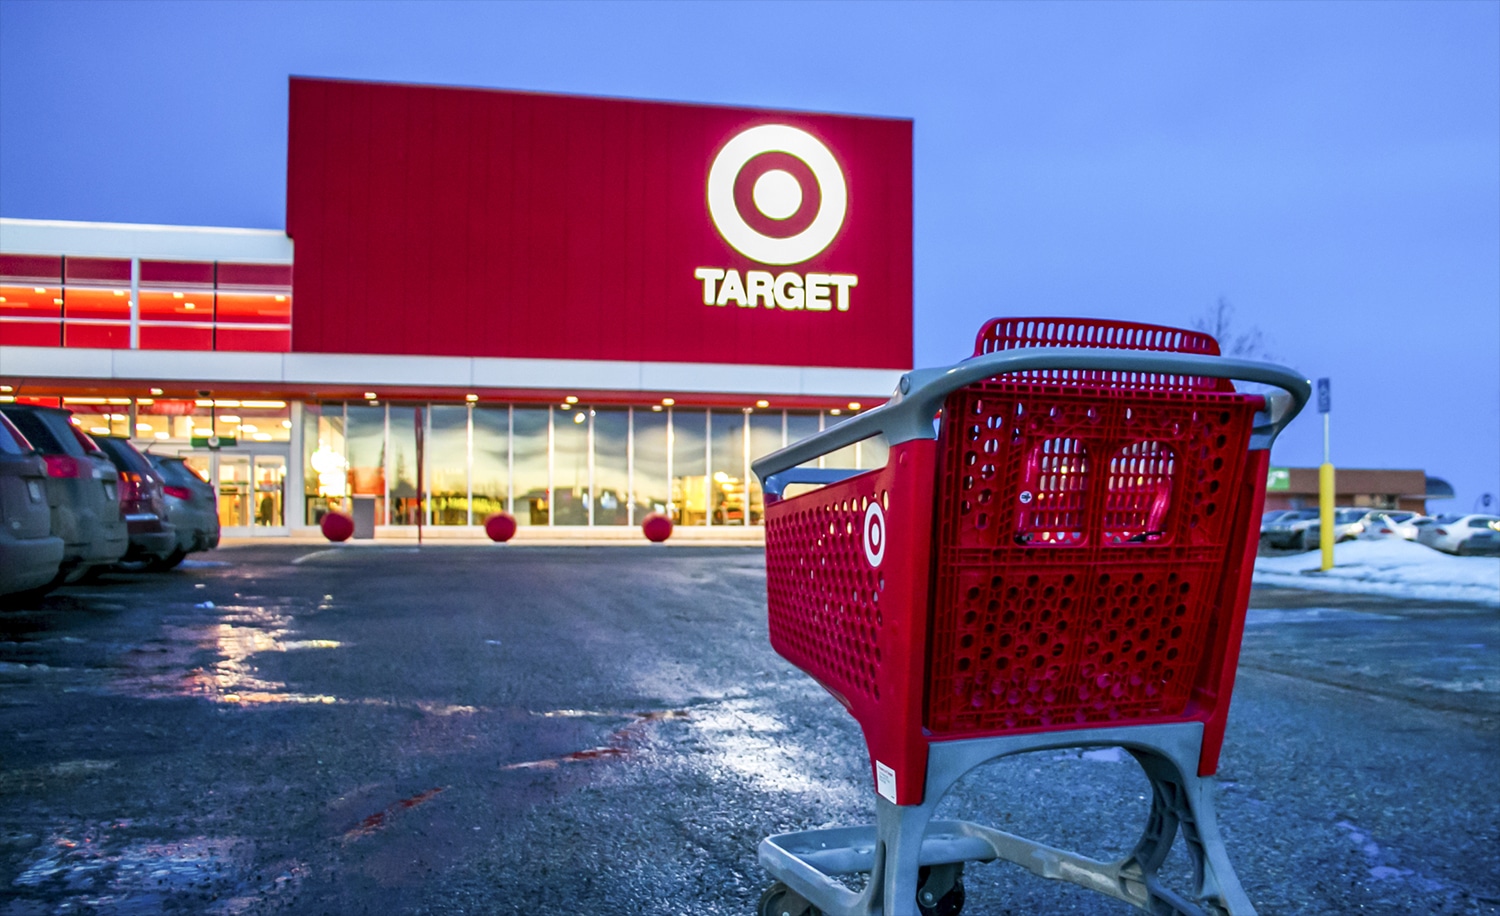 Target cuts prices on 5,000 everyday items to attract shoppers with inflation fatigue